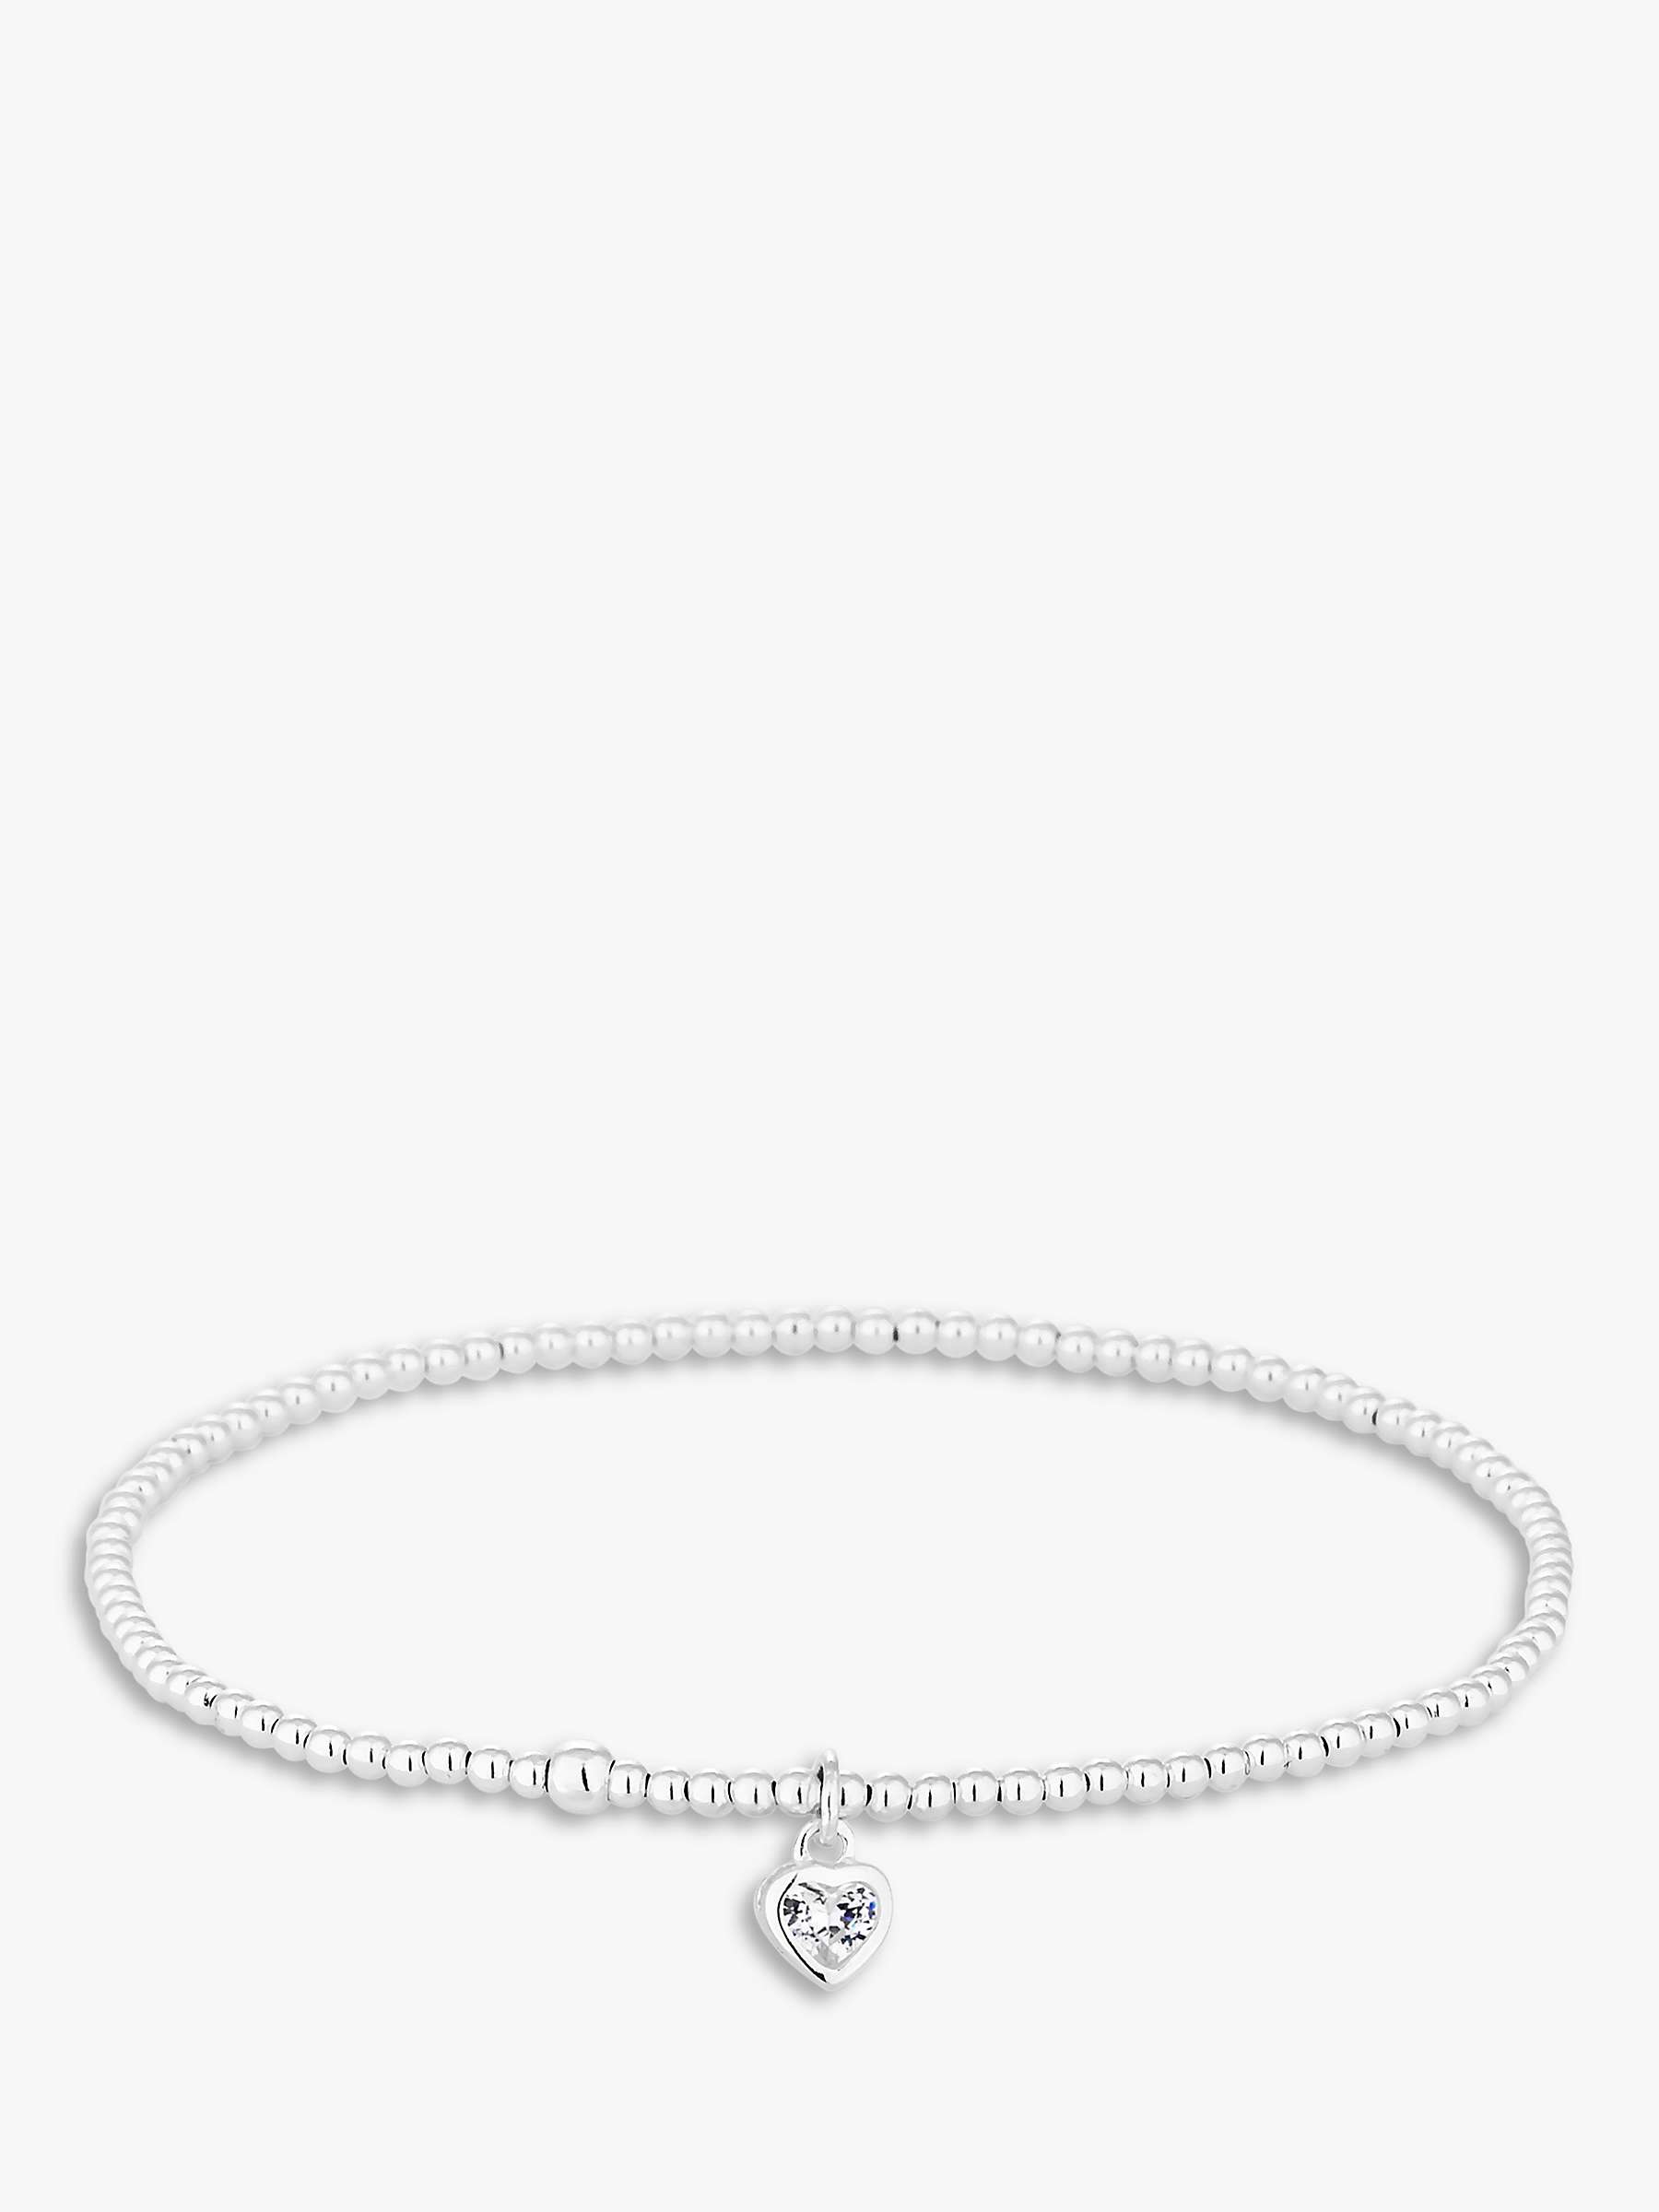 Buy Simply Silver Cubic Zirconia Heart Beaded Stretch Bracelet, Silver Online at johnlewis.com